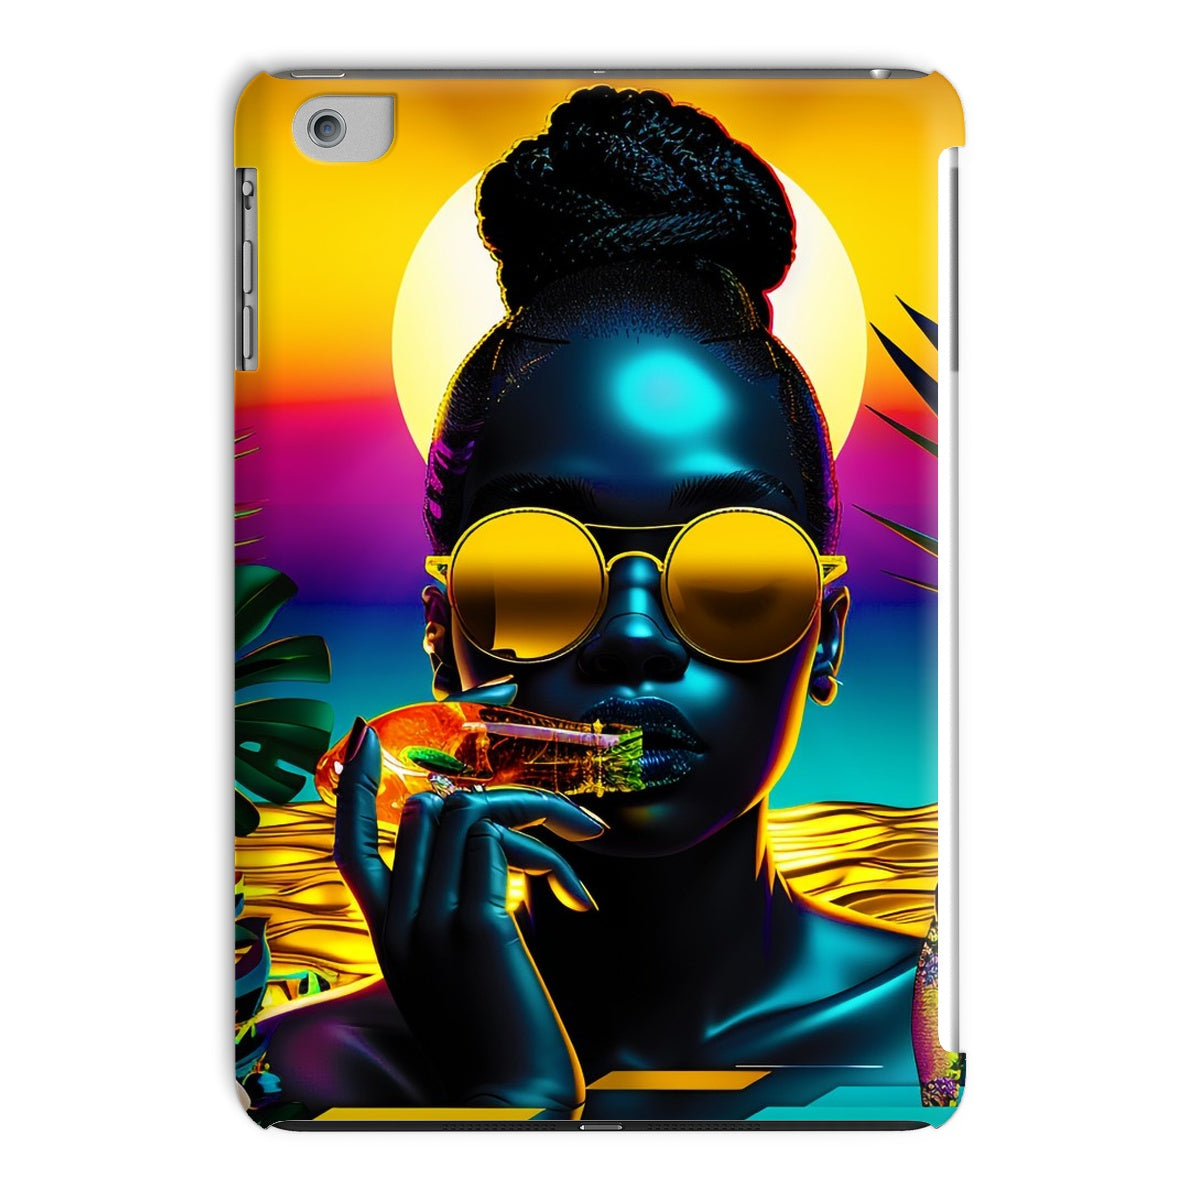 Tropical Sunset Dreams : Neon Vibes  Tablet Cases